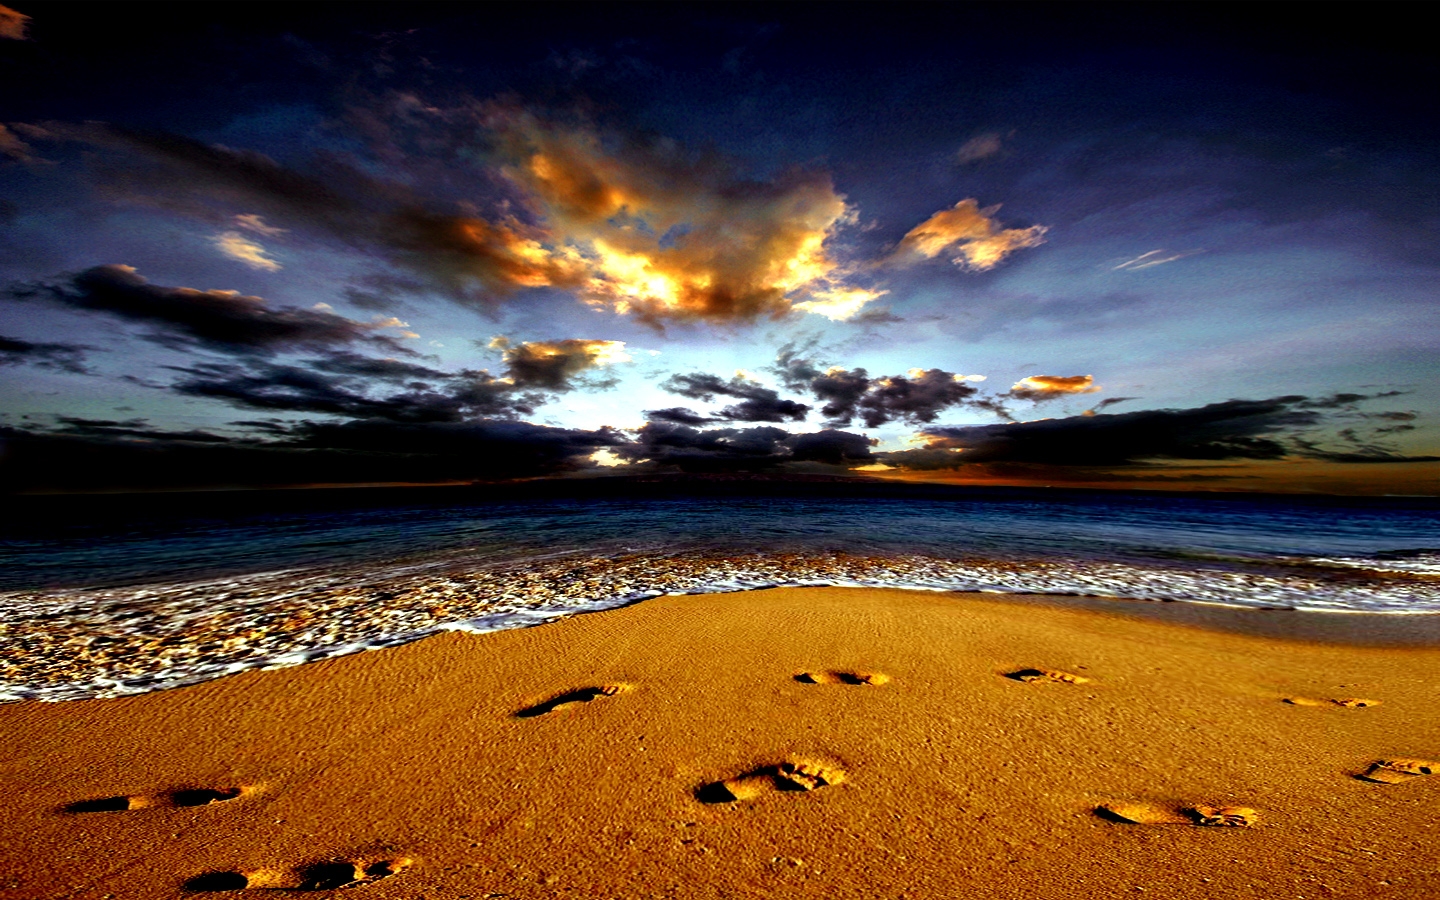 Download Mysterious Footprints on a Black Background Wallpaper | Wallpapers .com